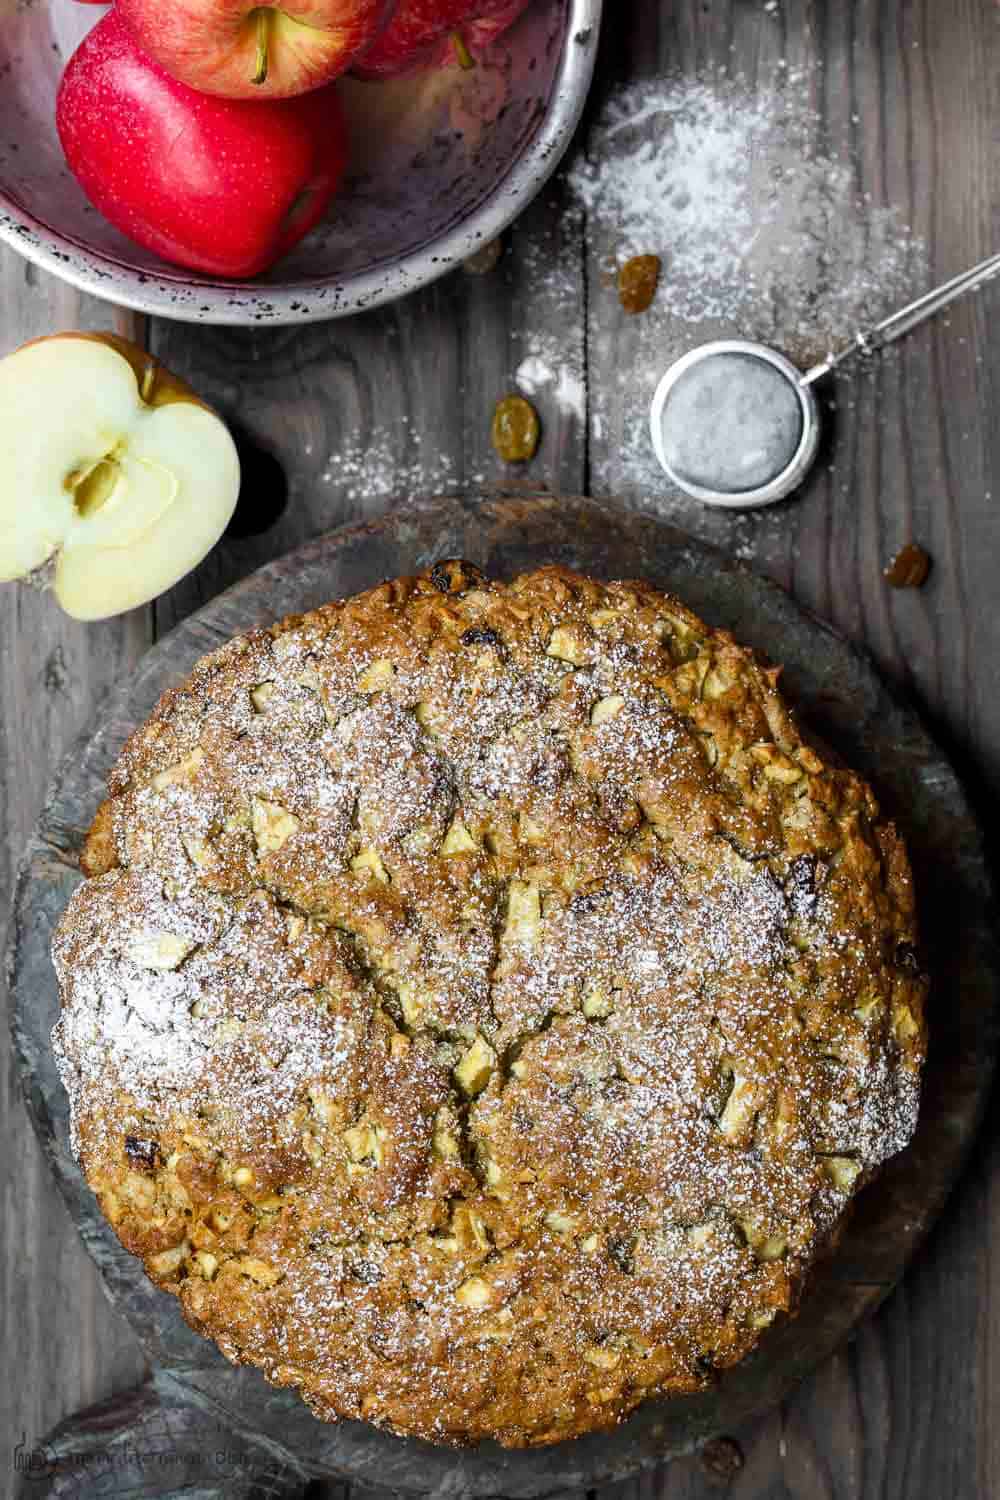 Apple Olive Oil cake whole. A dusting of sugar on top